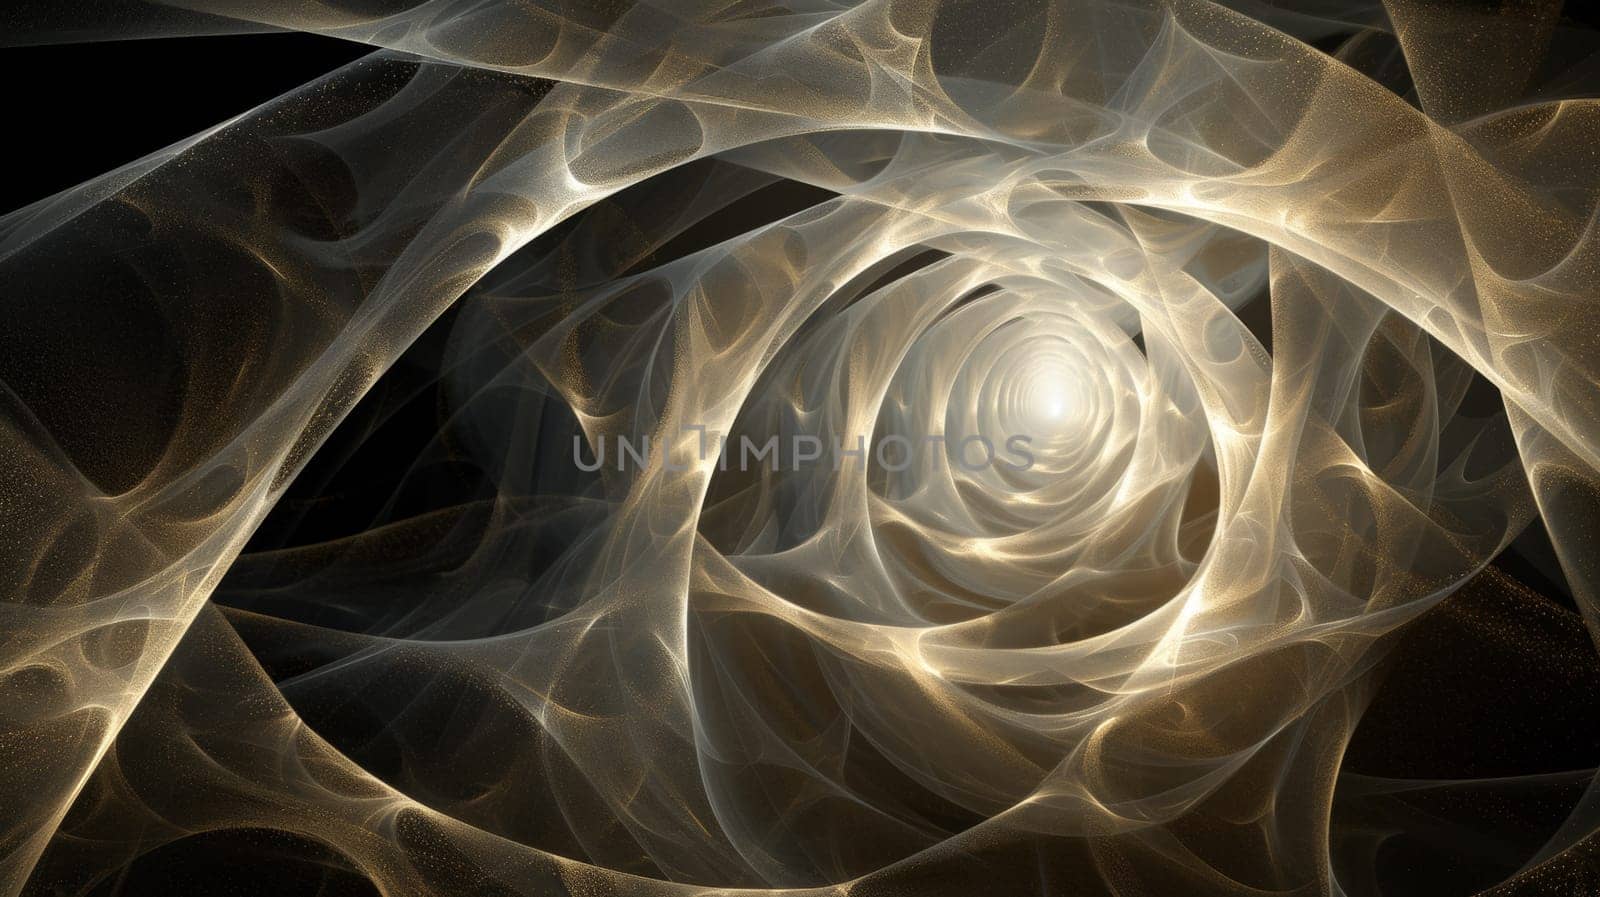 A very abstract image of a spiral design with some light